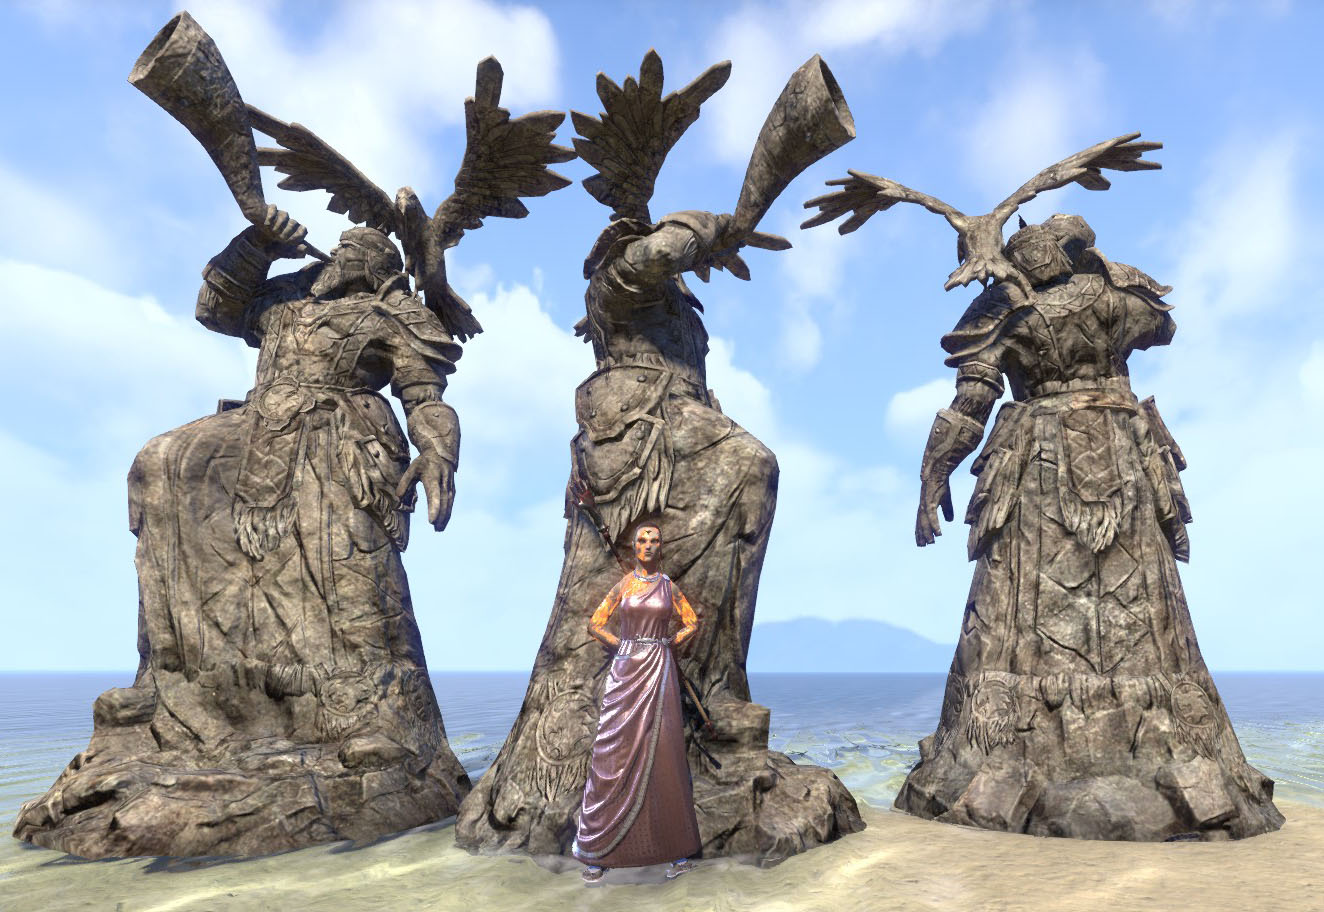 Gallery of Statues Eso Fashion.